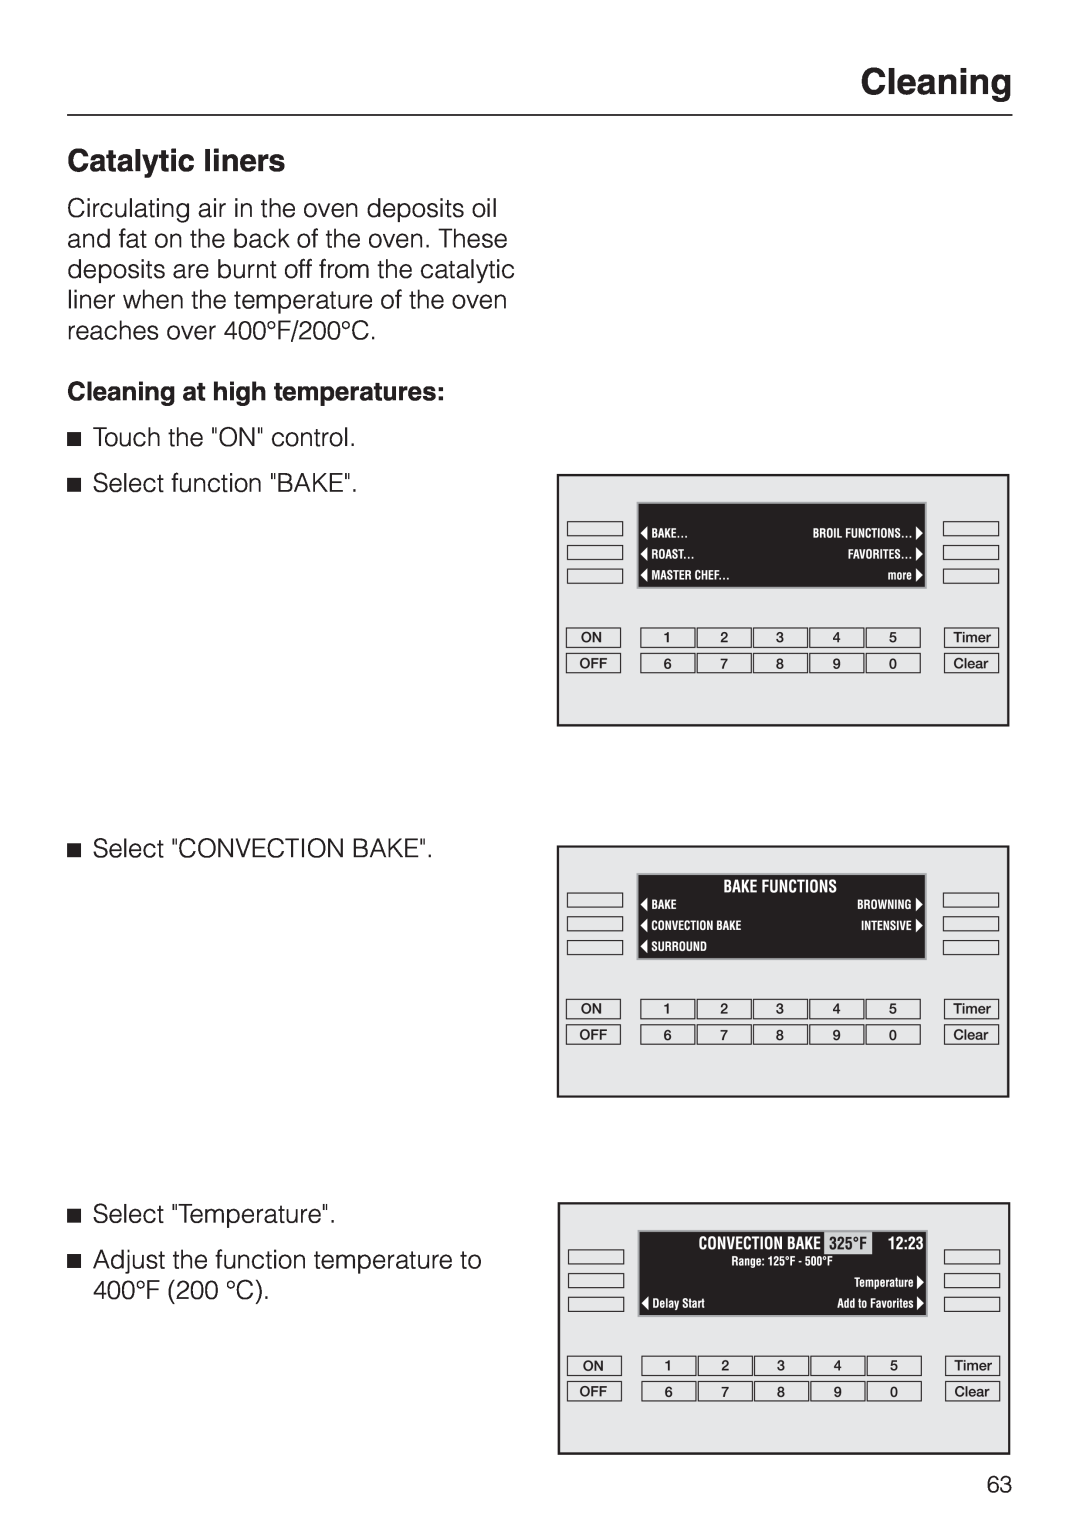 Miele H395B, H396B operating instructions Catalytic liners, Cleaning at high temperatures 